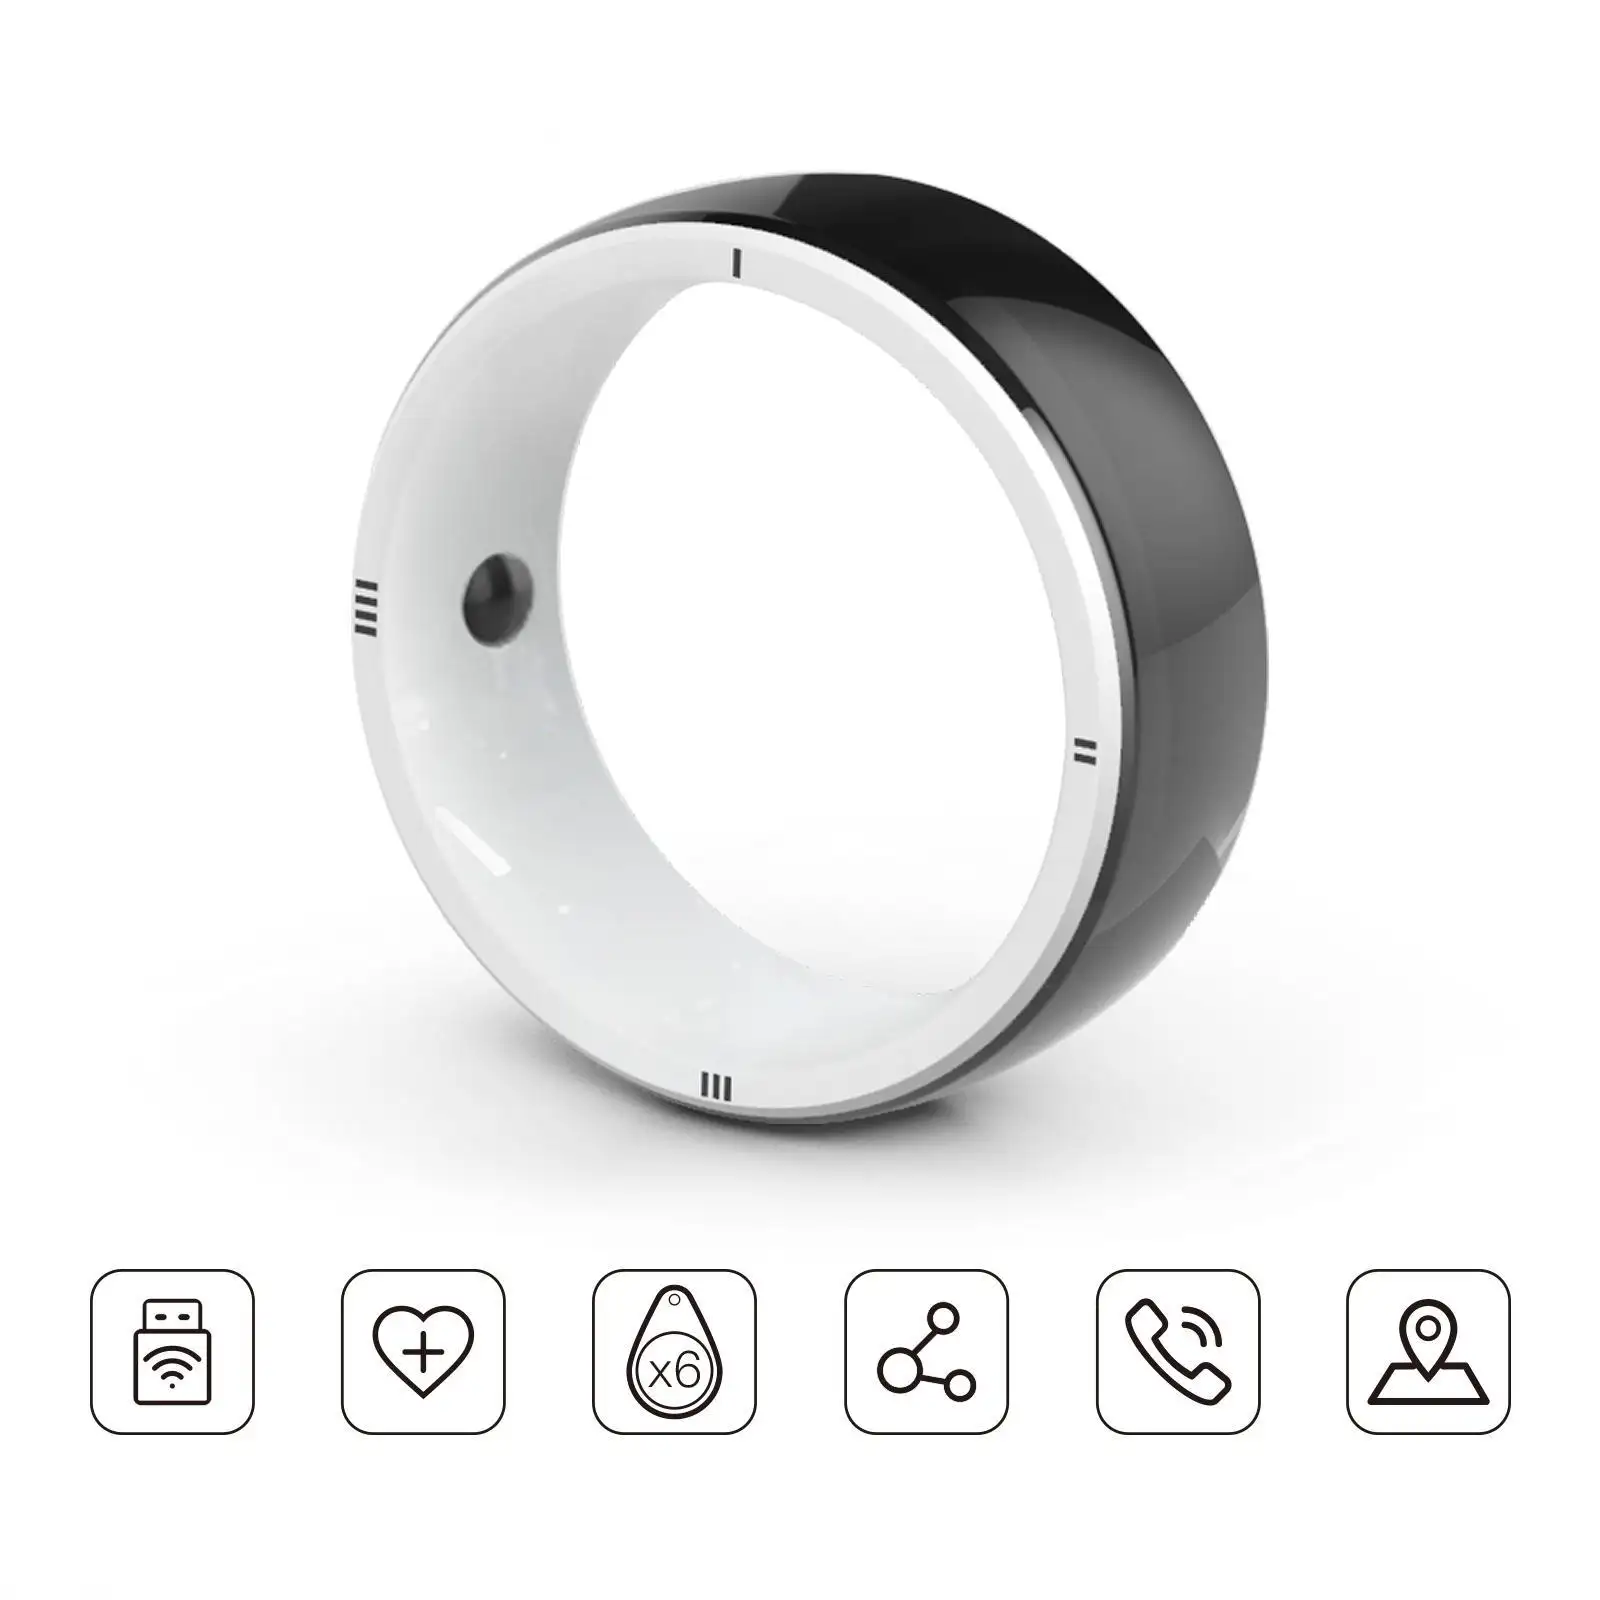 JAKCOM R5 Smart Ring New Smart Ring arrival as wireless charger 1 ohm stable amp karaoke songs 512gb usb sd card mp3 player